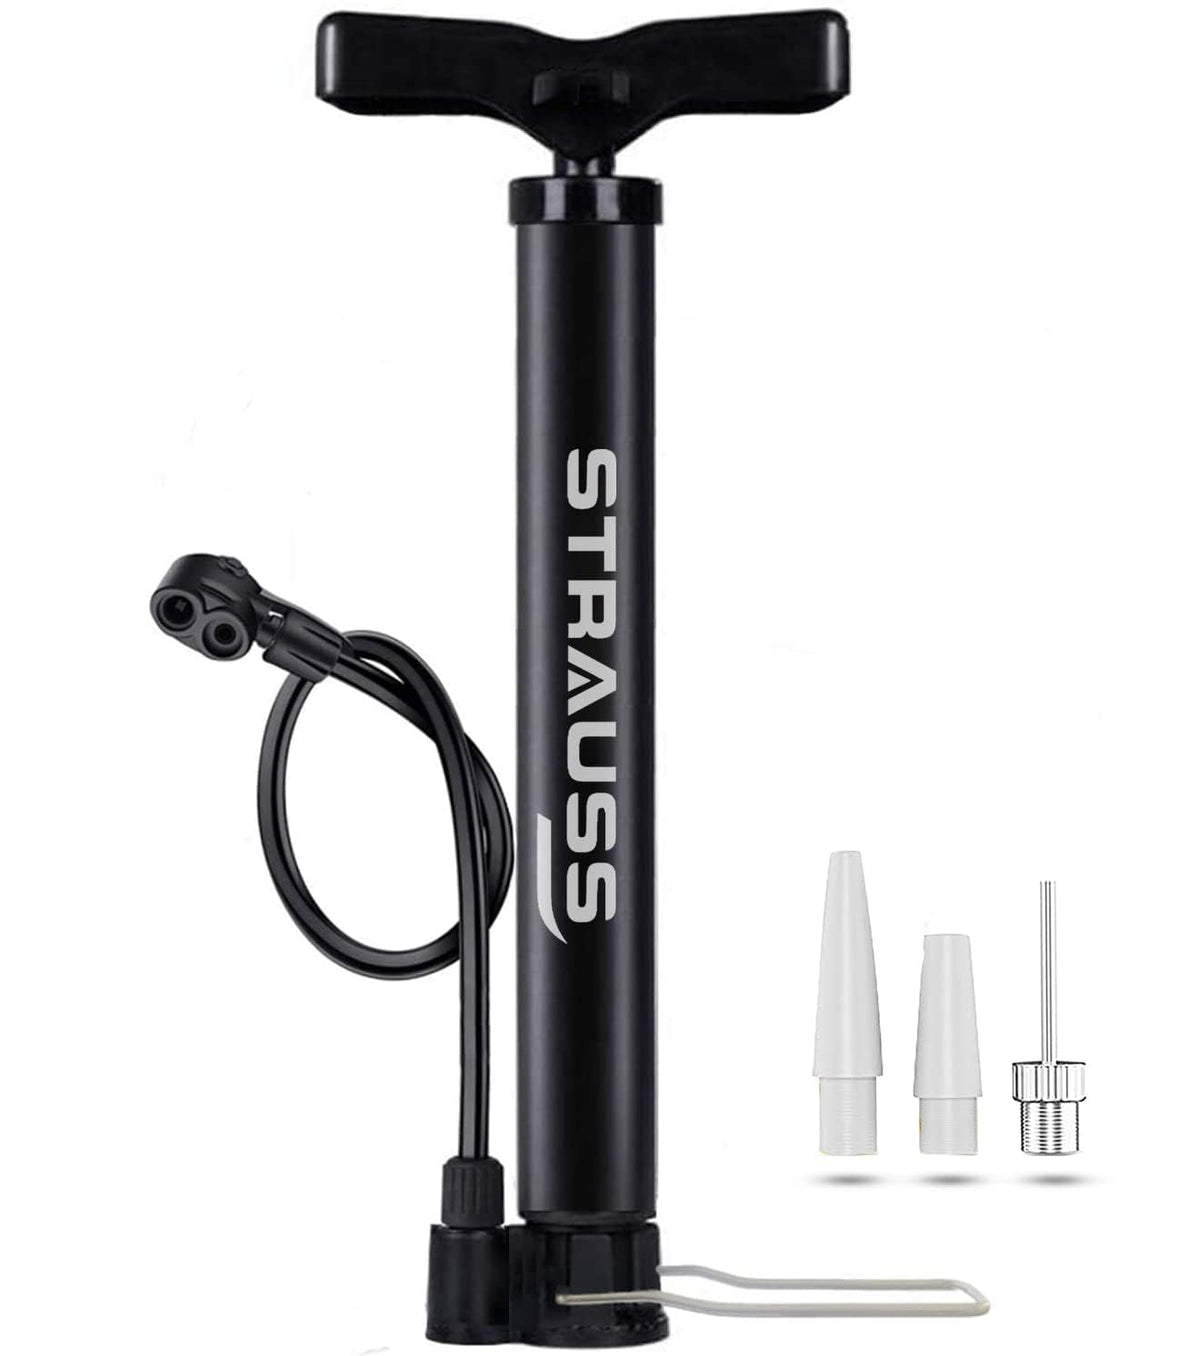 Strauss Bicycle Air Pump with Needle & Dual Valve | Portable Pump with 2 Modes, Ideal for Inflating Bicycle, Swimming Rings | (Black) Pack of 4